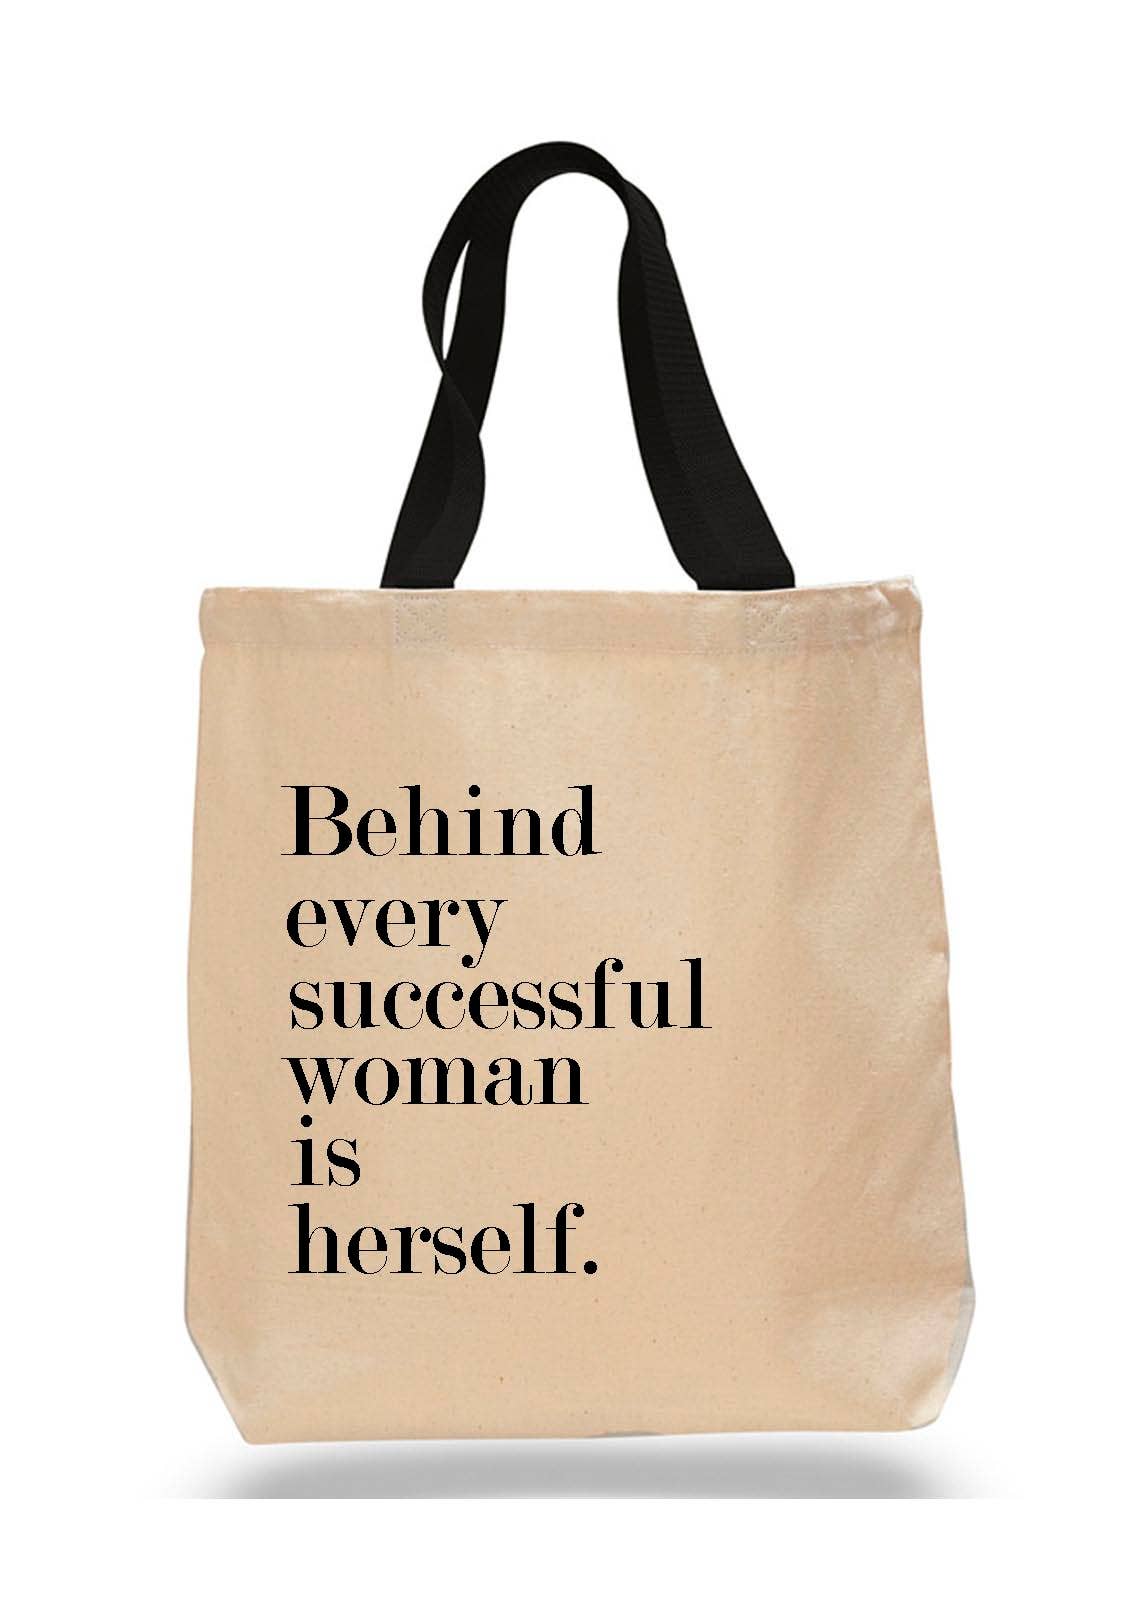 Eco Friendly Printed Nude Tote Bag Nude Woman Bag 100% Cotton Female Figure Tote Loving Yourself is the Greatest Revolution Tote Bag